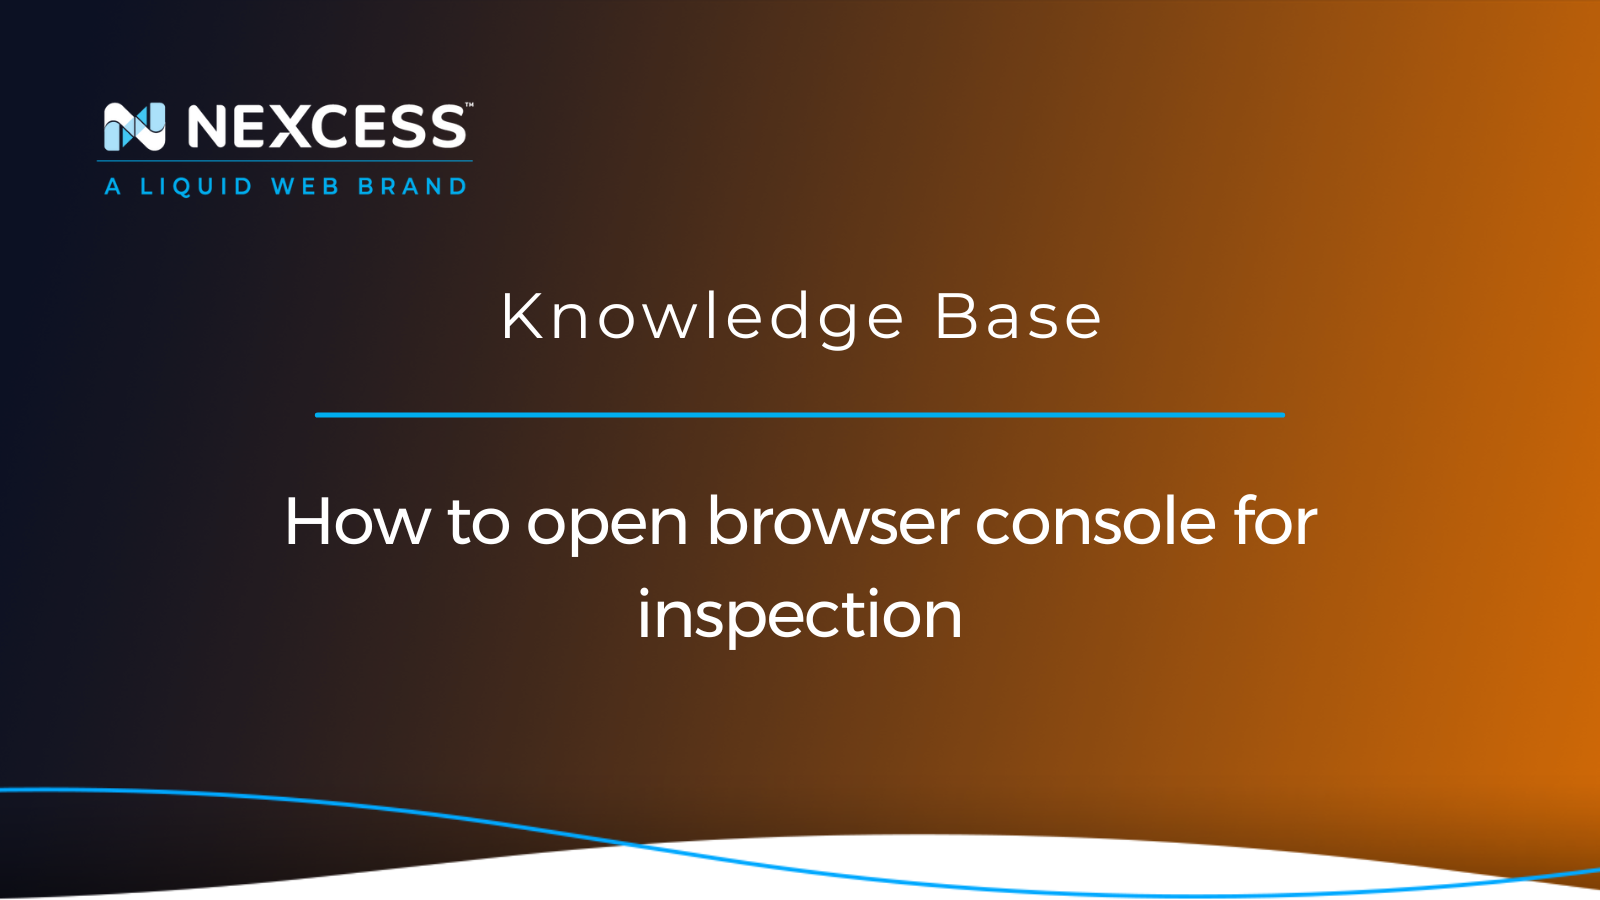 How to open browser console for inspection